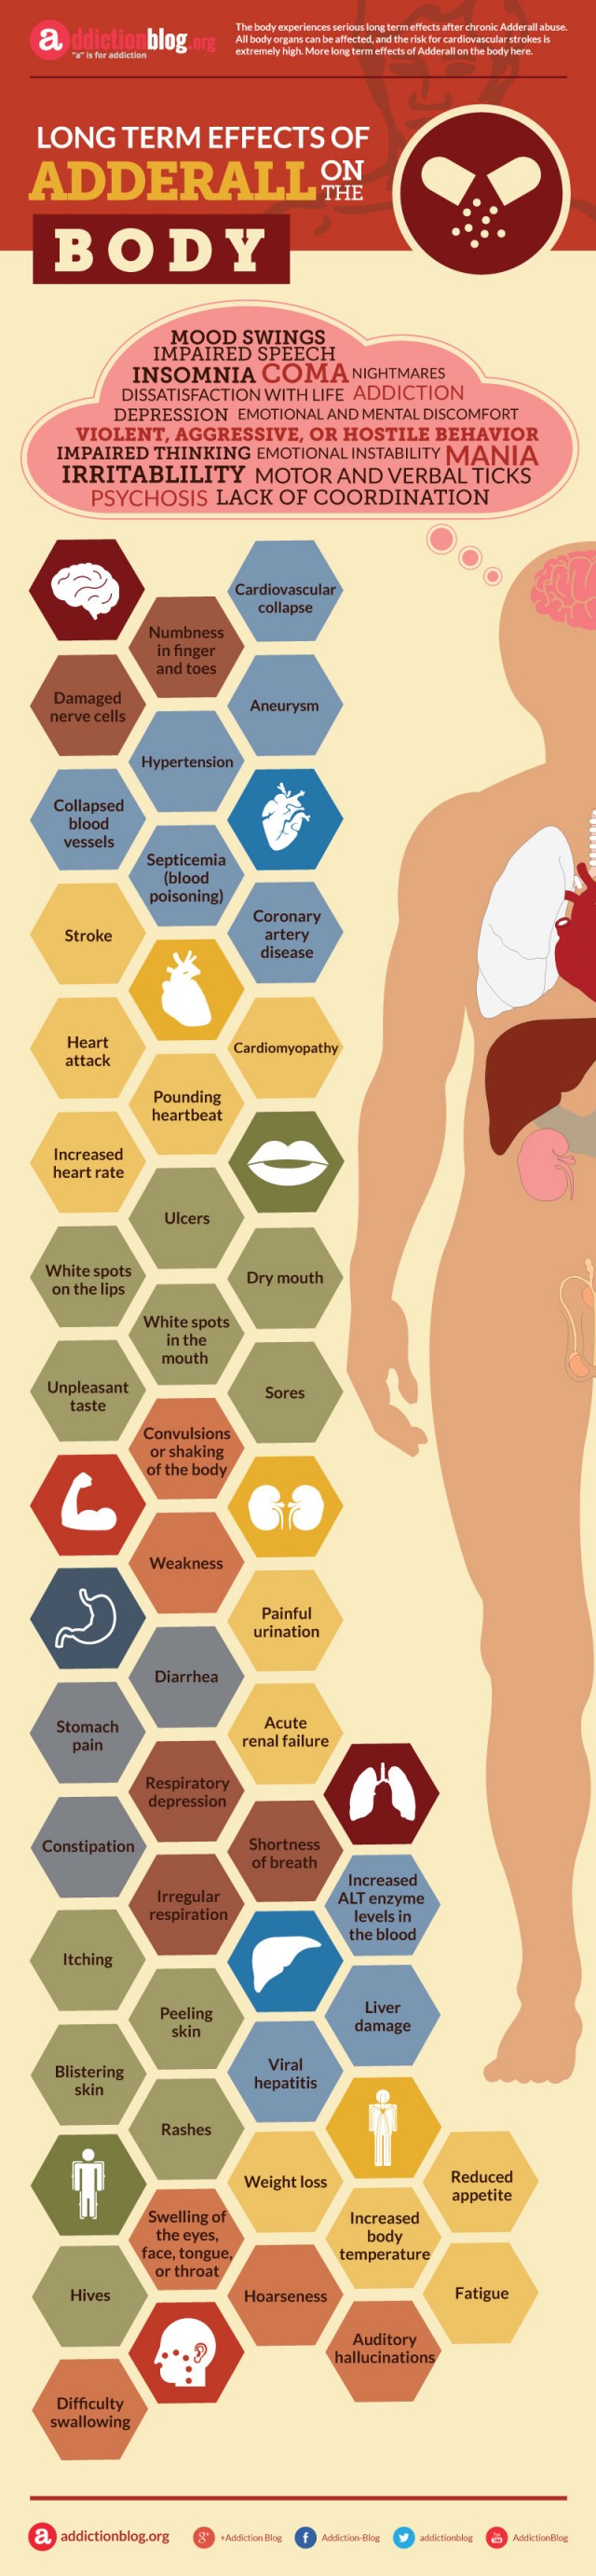 Long Term Effects of Adderall on the Body (INFOGRAPHIC)